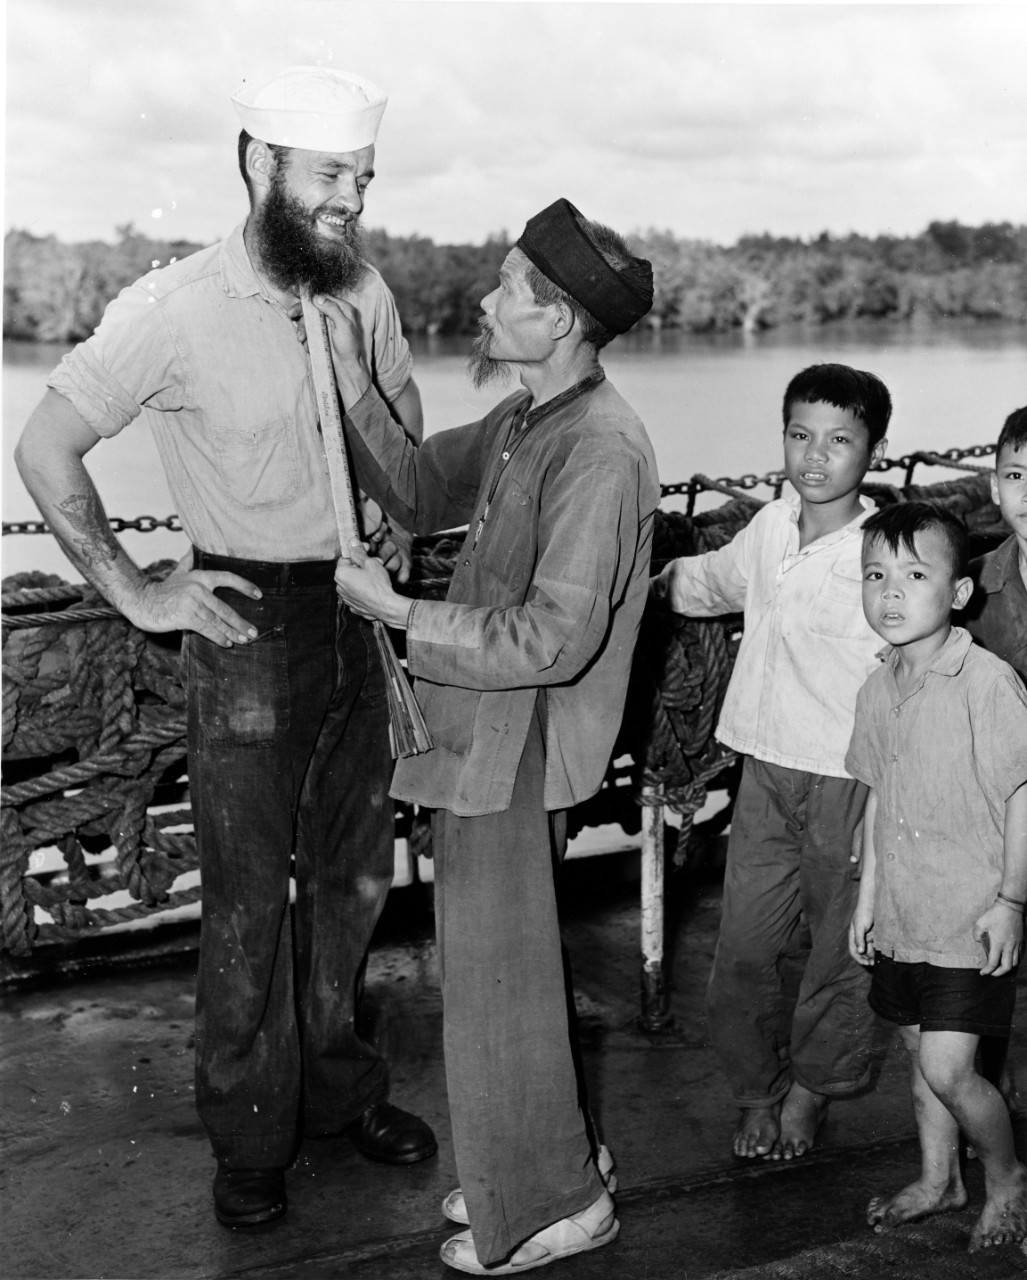 ENSN James I. Hart, USN, has his beard measured by a Vietnamese refugee white other refugees look on during their "Passage to Freedom" from Haiphong to Saigon, South Vietnam, 1954. 